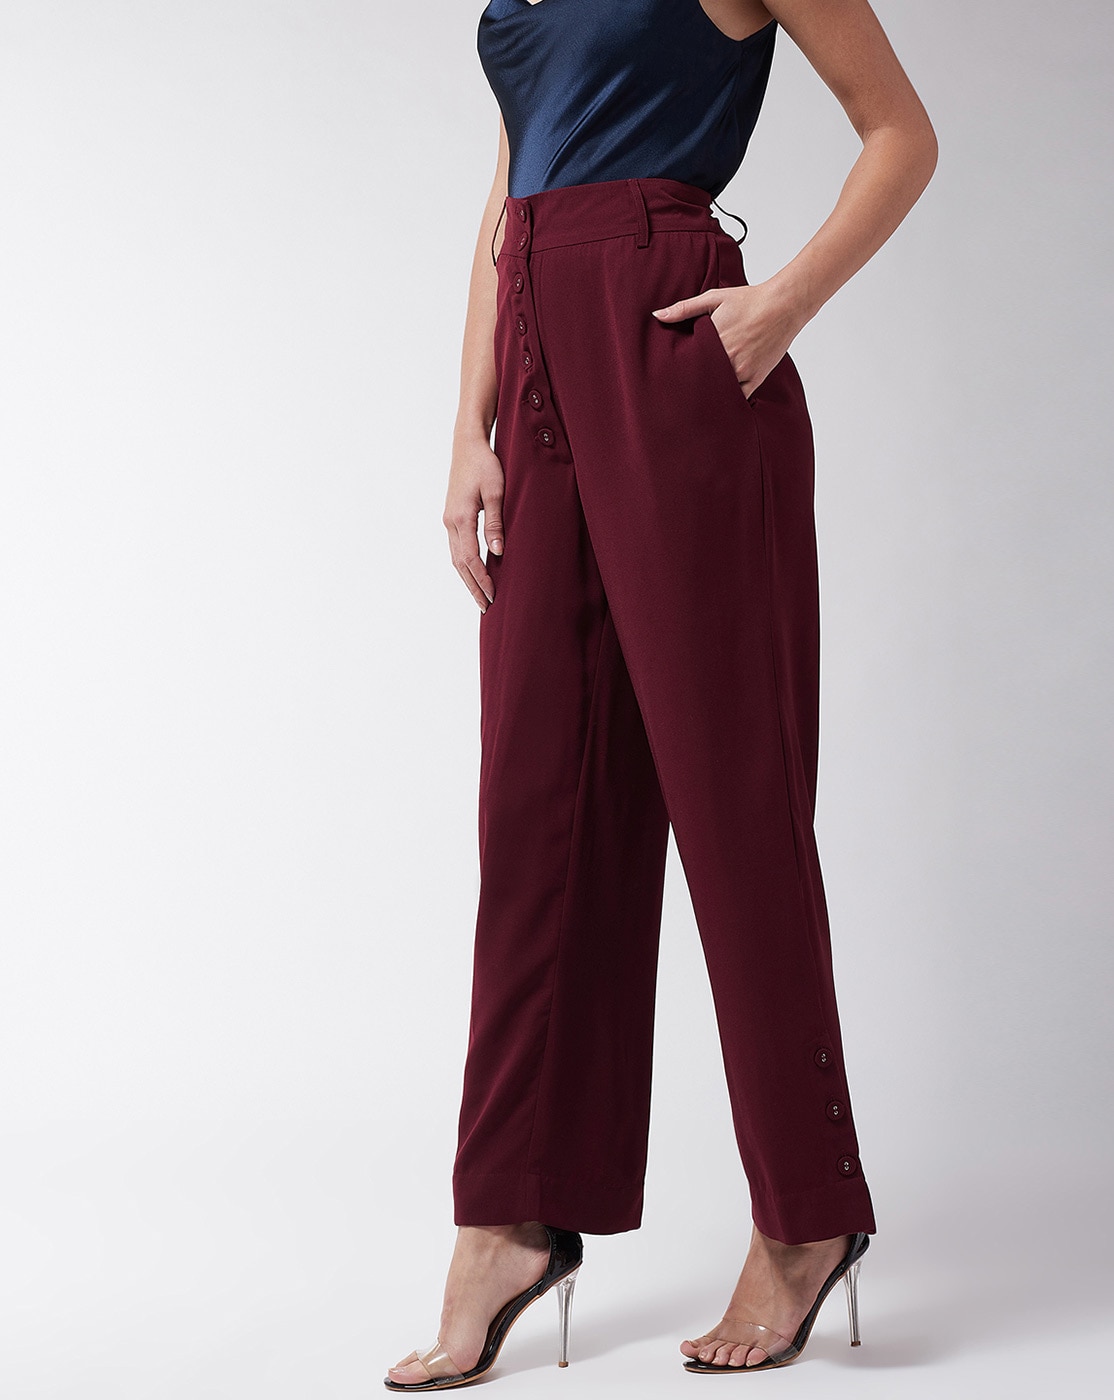 Ladies Best Combination Of Burgundy Pants Outfits 2023/Maroon Pants & Color  Top Ideas - YouTube